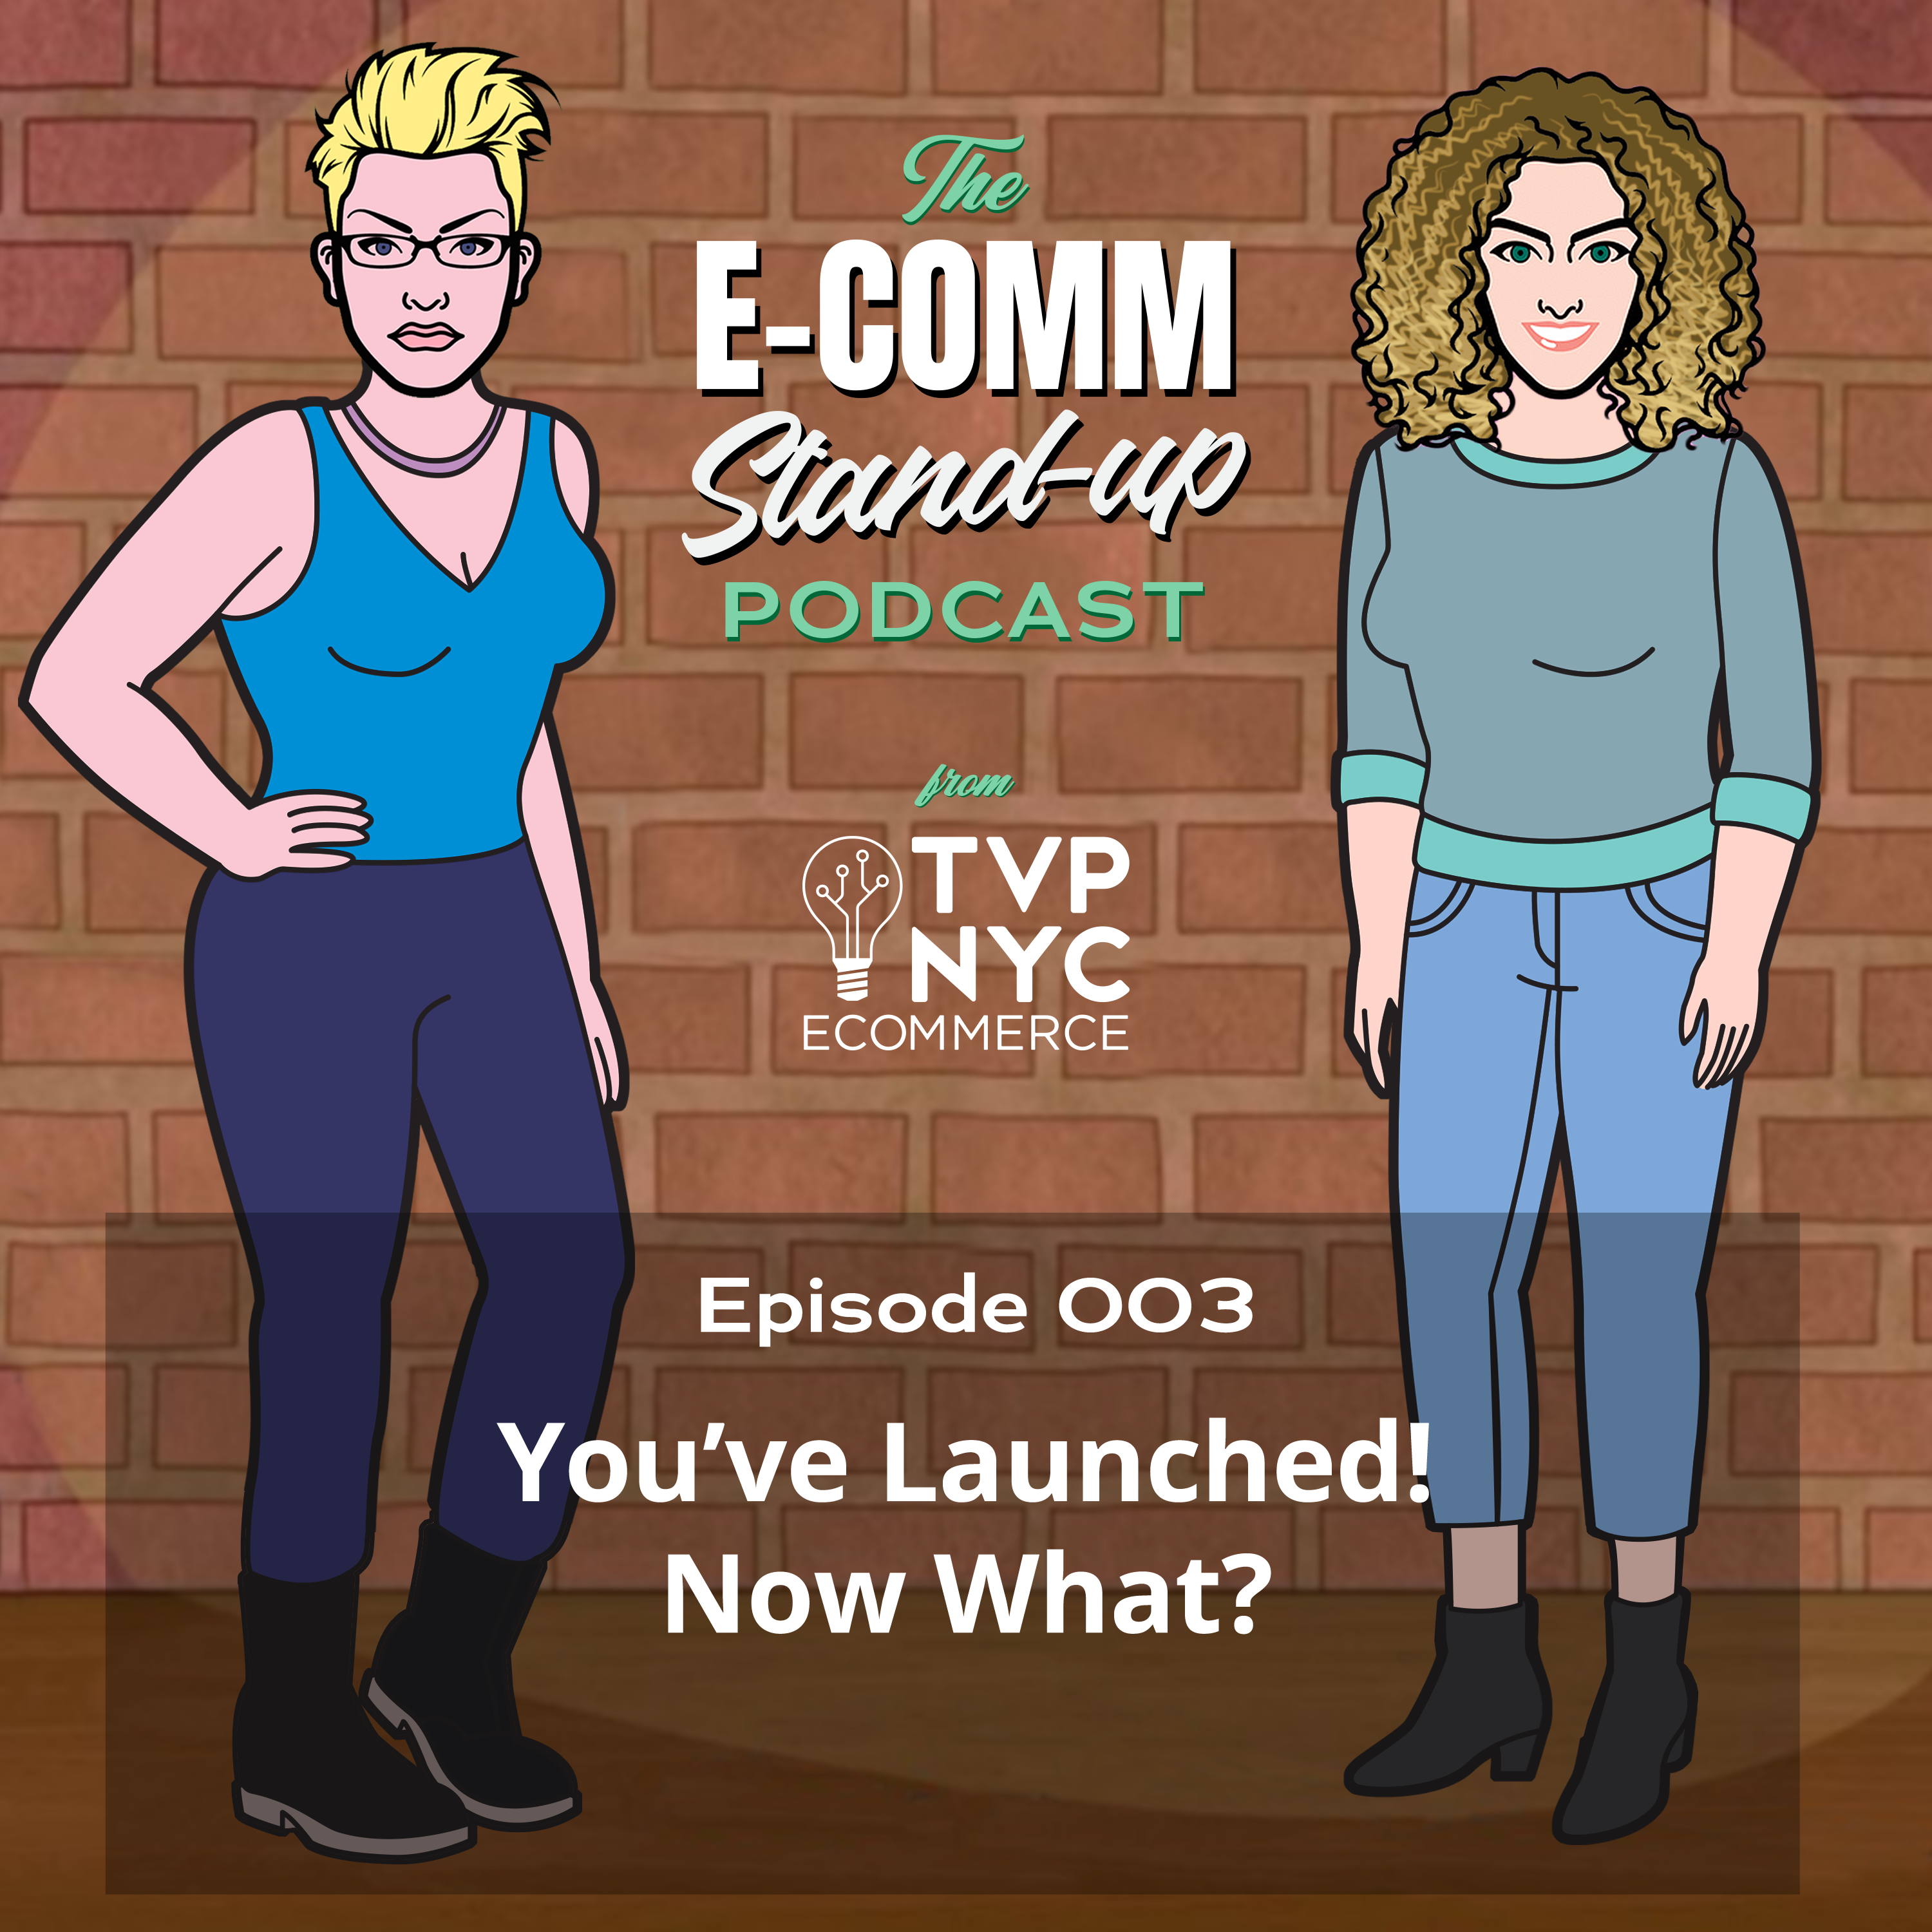 [Podcast] You've Launched! Now What?